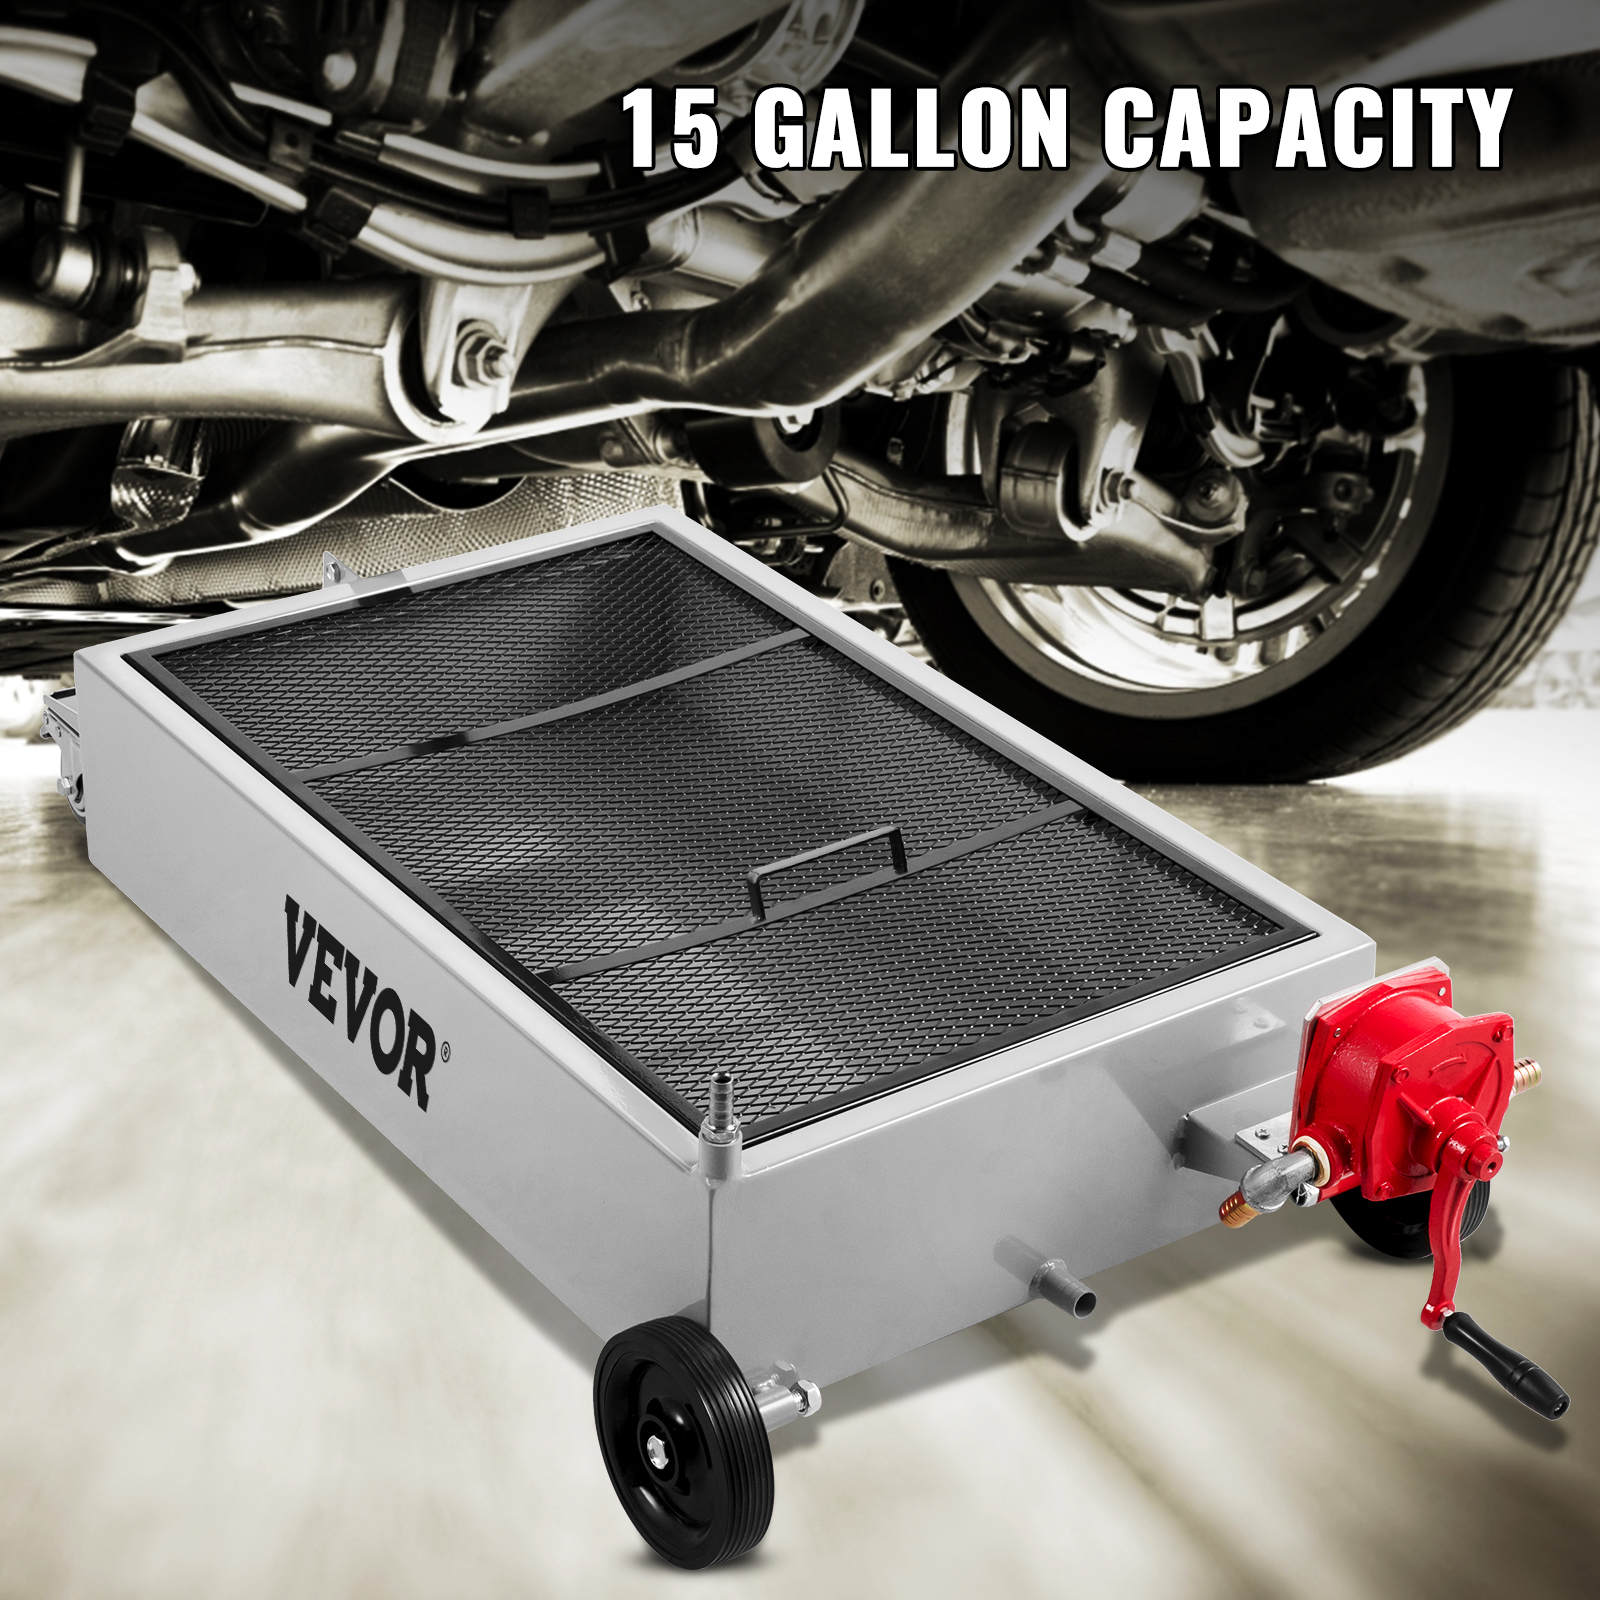 VEVOR 17 Gal Portable Pump Low Profile Oil Drain Pan with 8 ft. Hose for SUV Car & Trucks